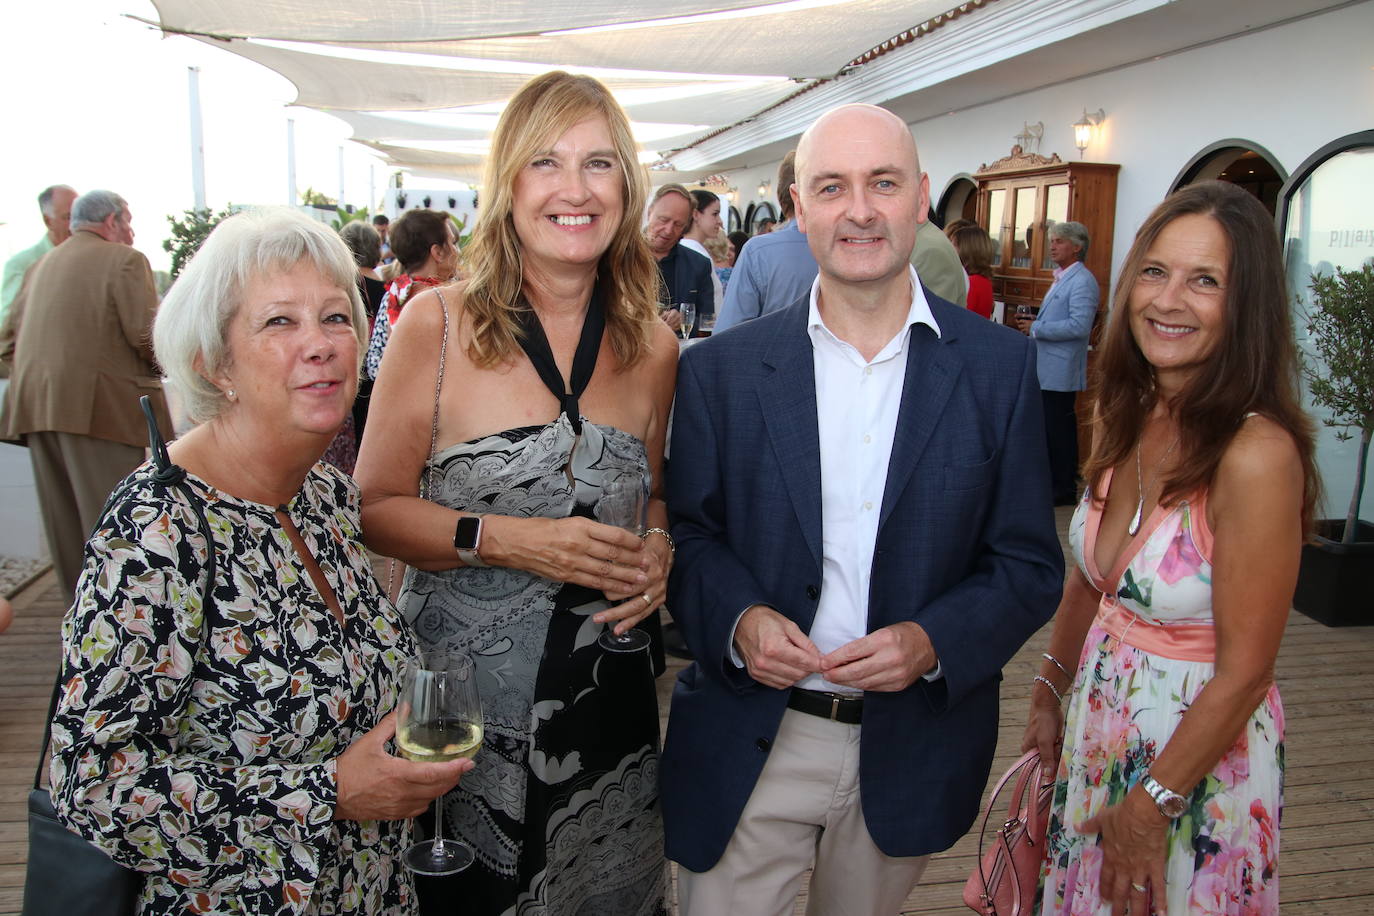 Tuesday’s gala dinner for the Costa Press Club's 20th anniversary was attended by members and guests, including representatives of the Spanish press association and Malaga University